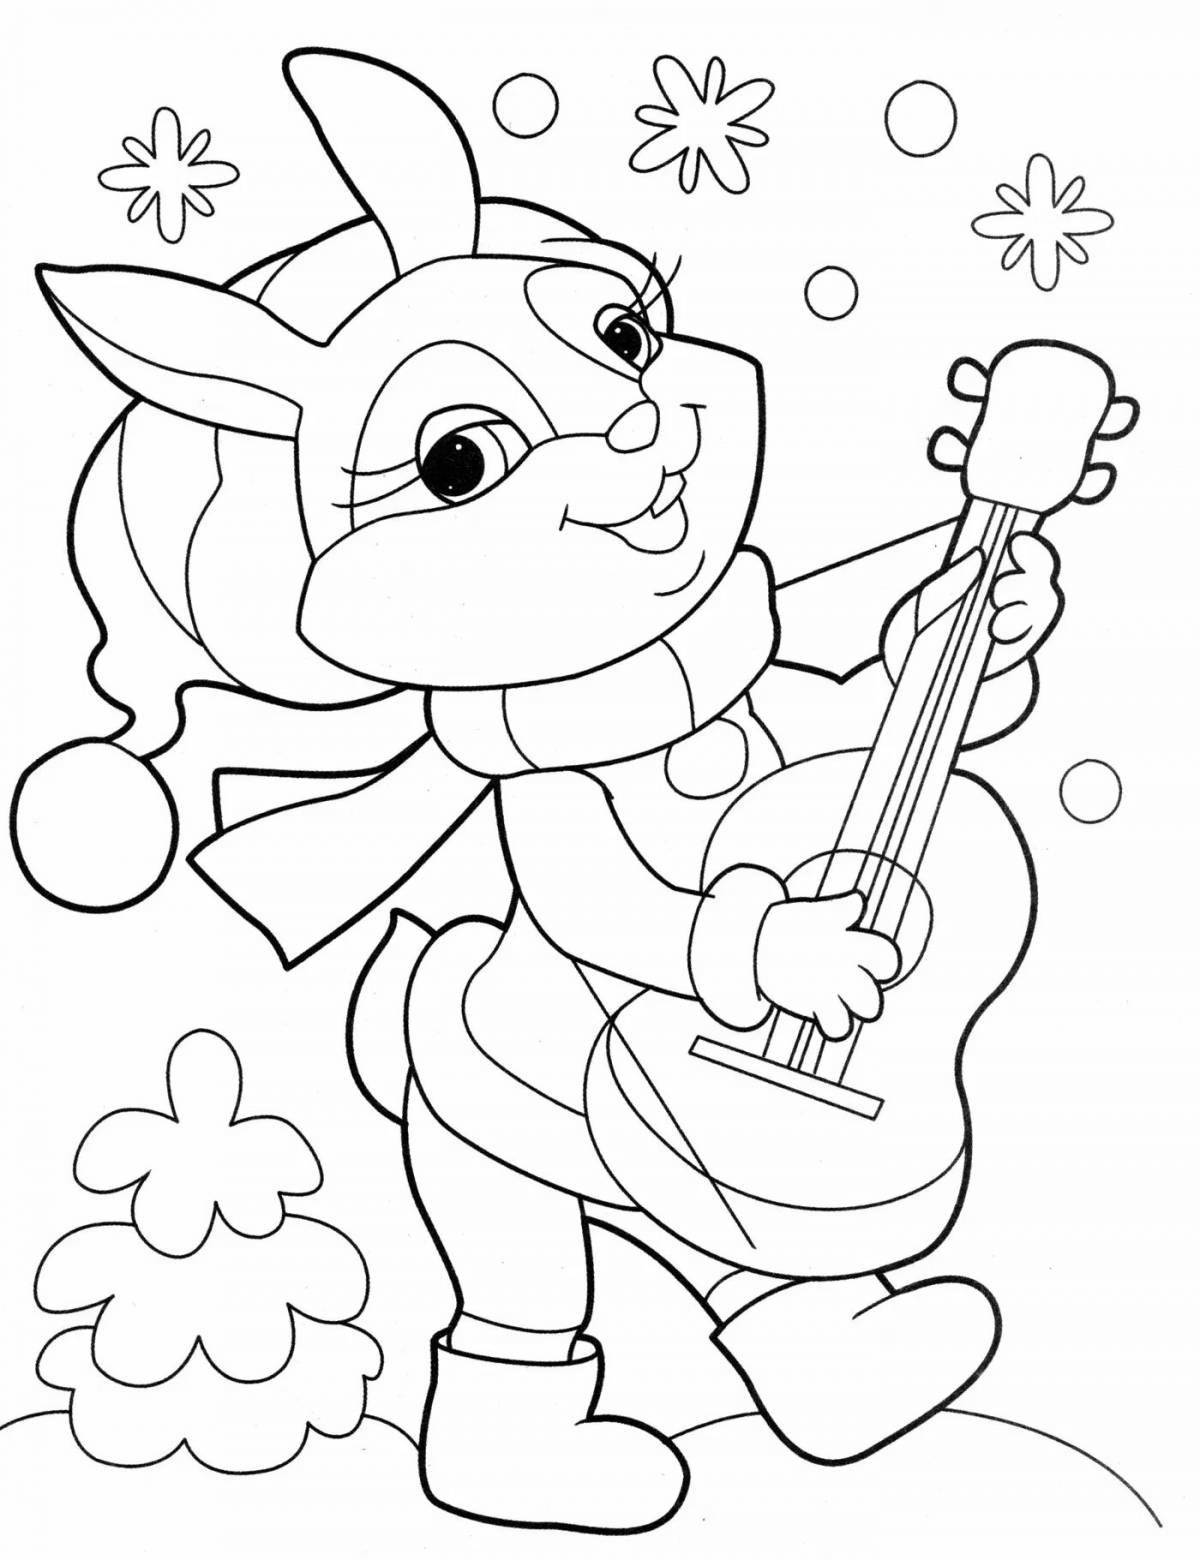 Coloring page magic hare and tree